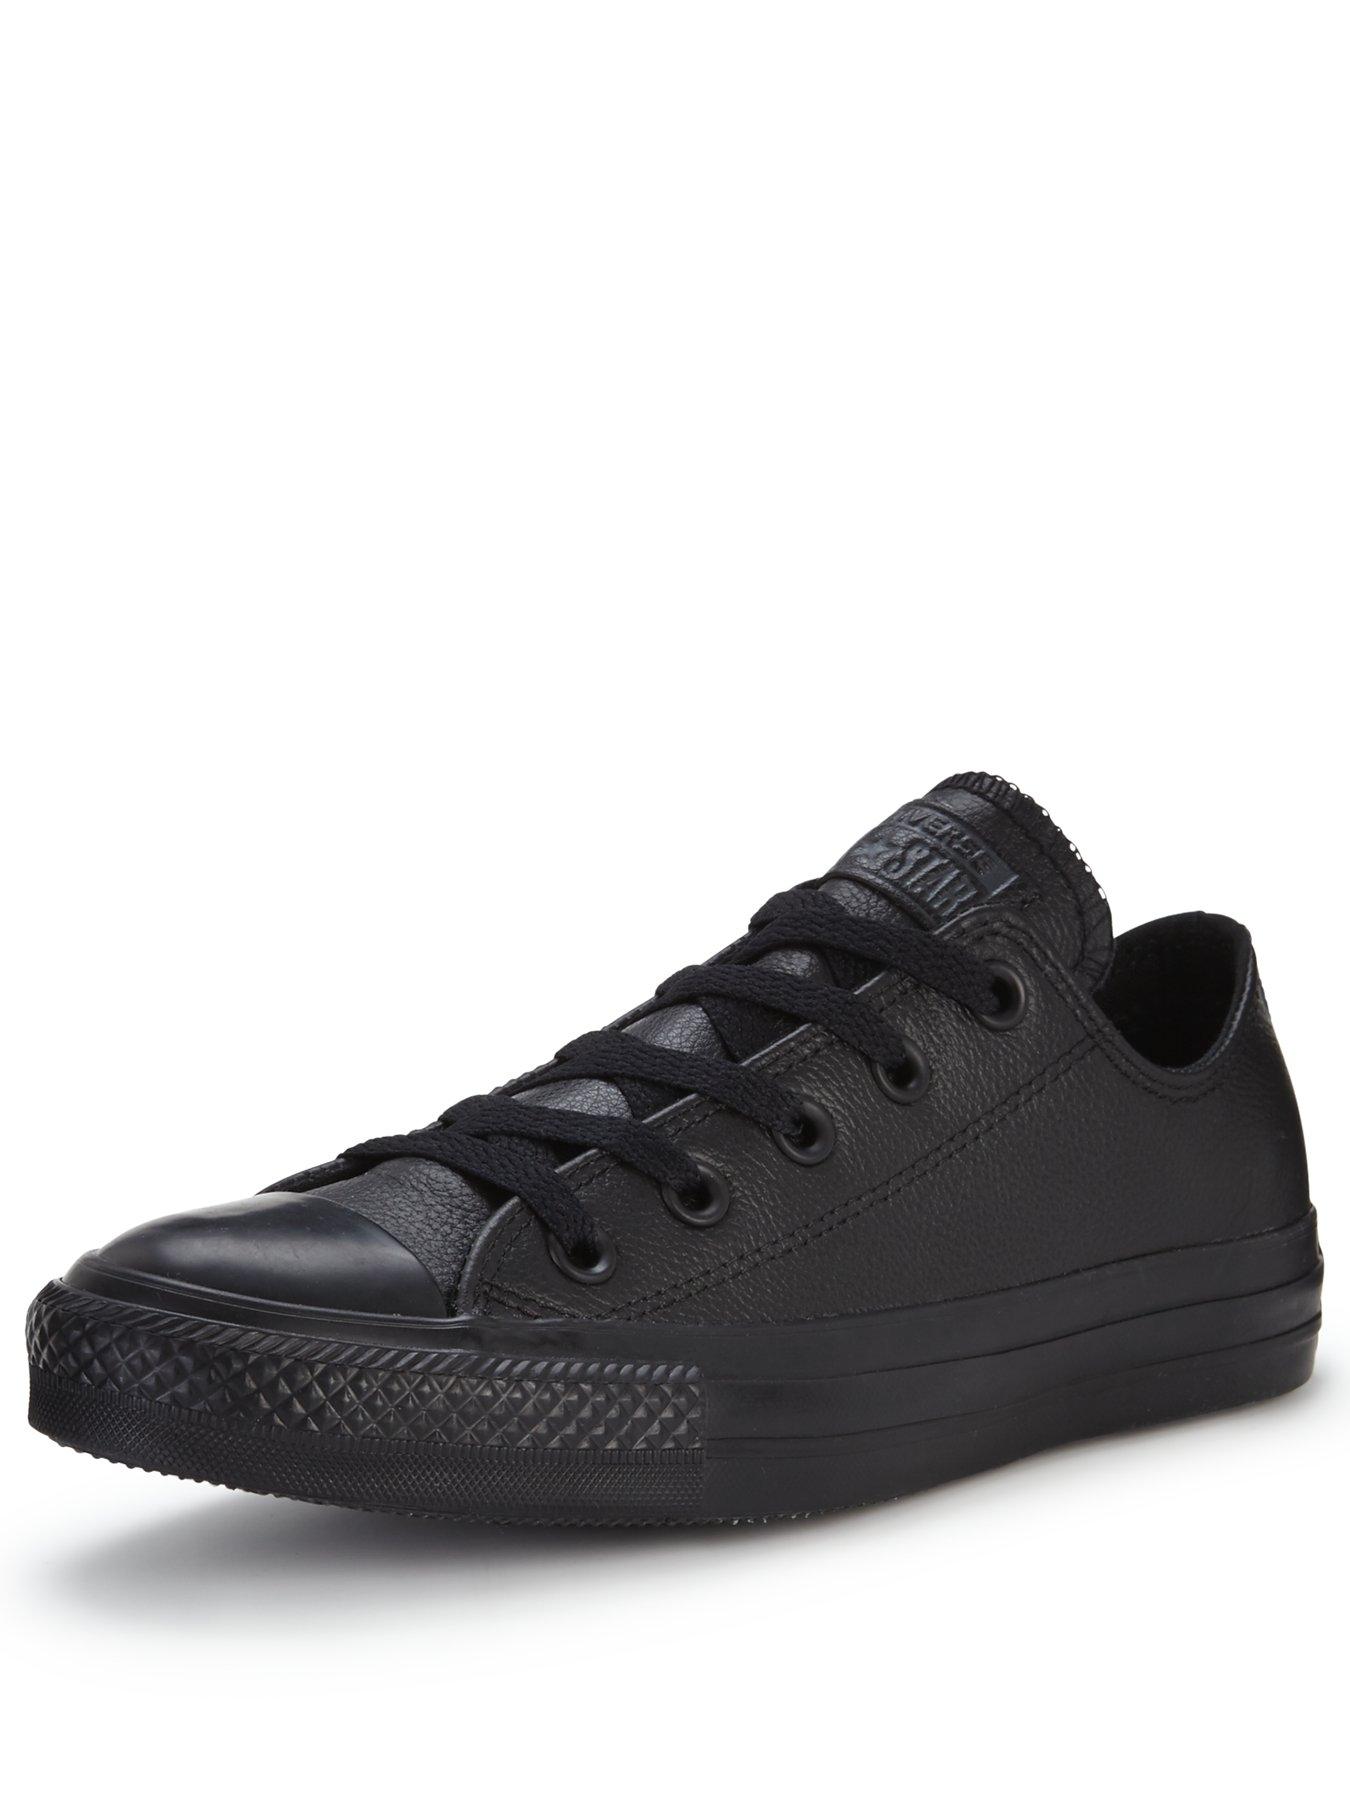 Women's Leather Converse Trainers 